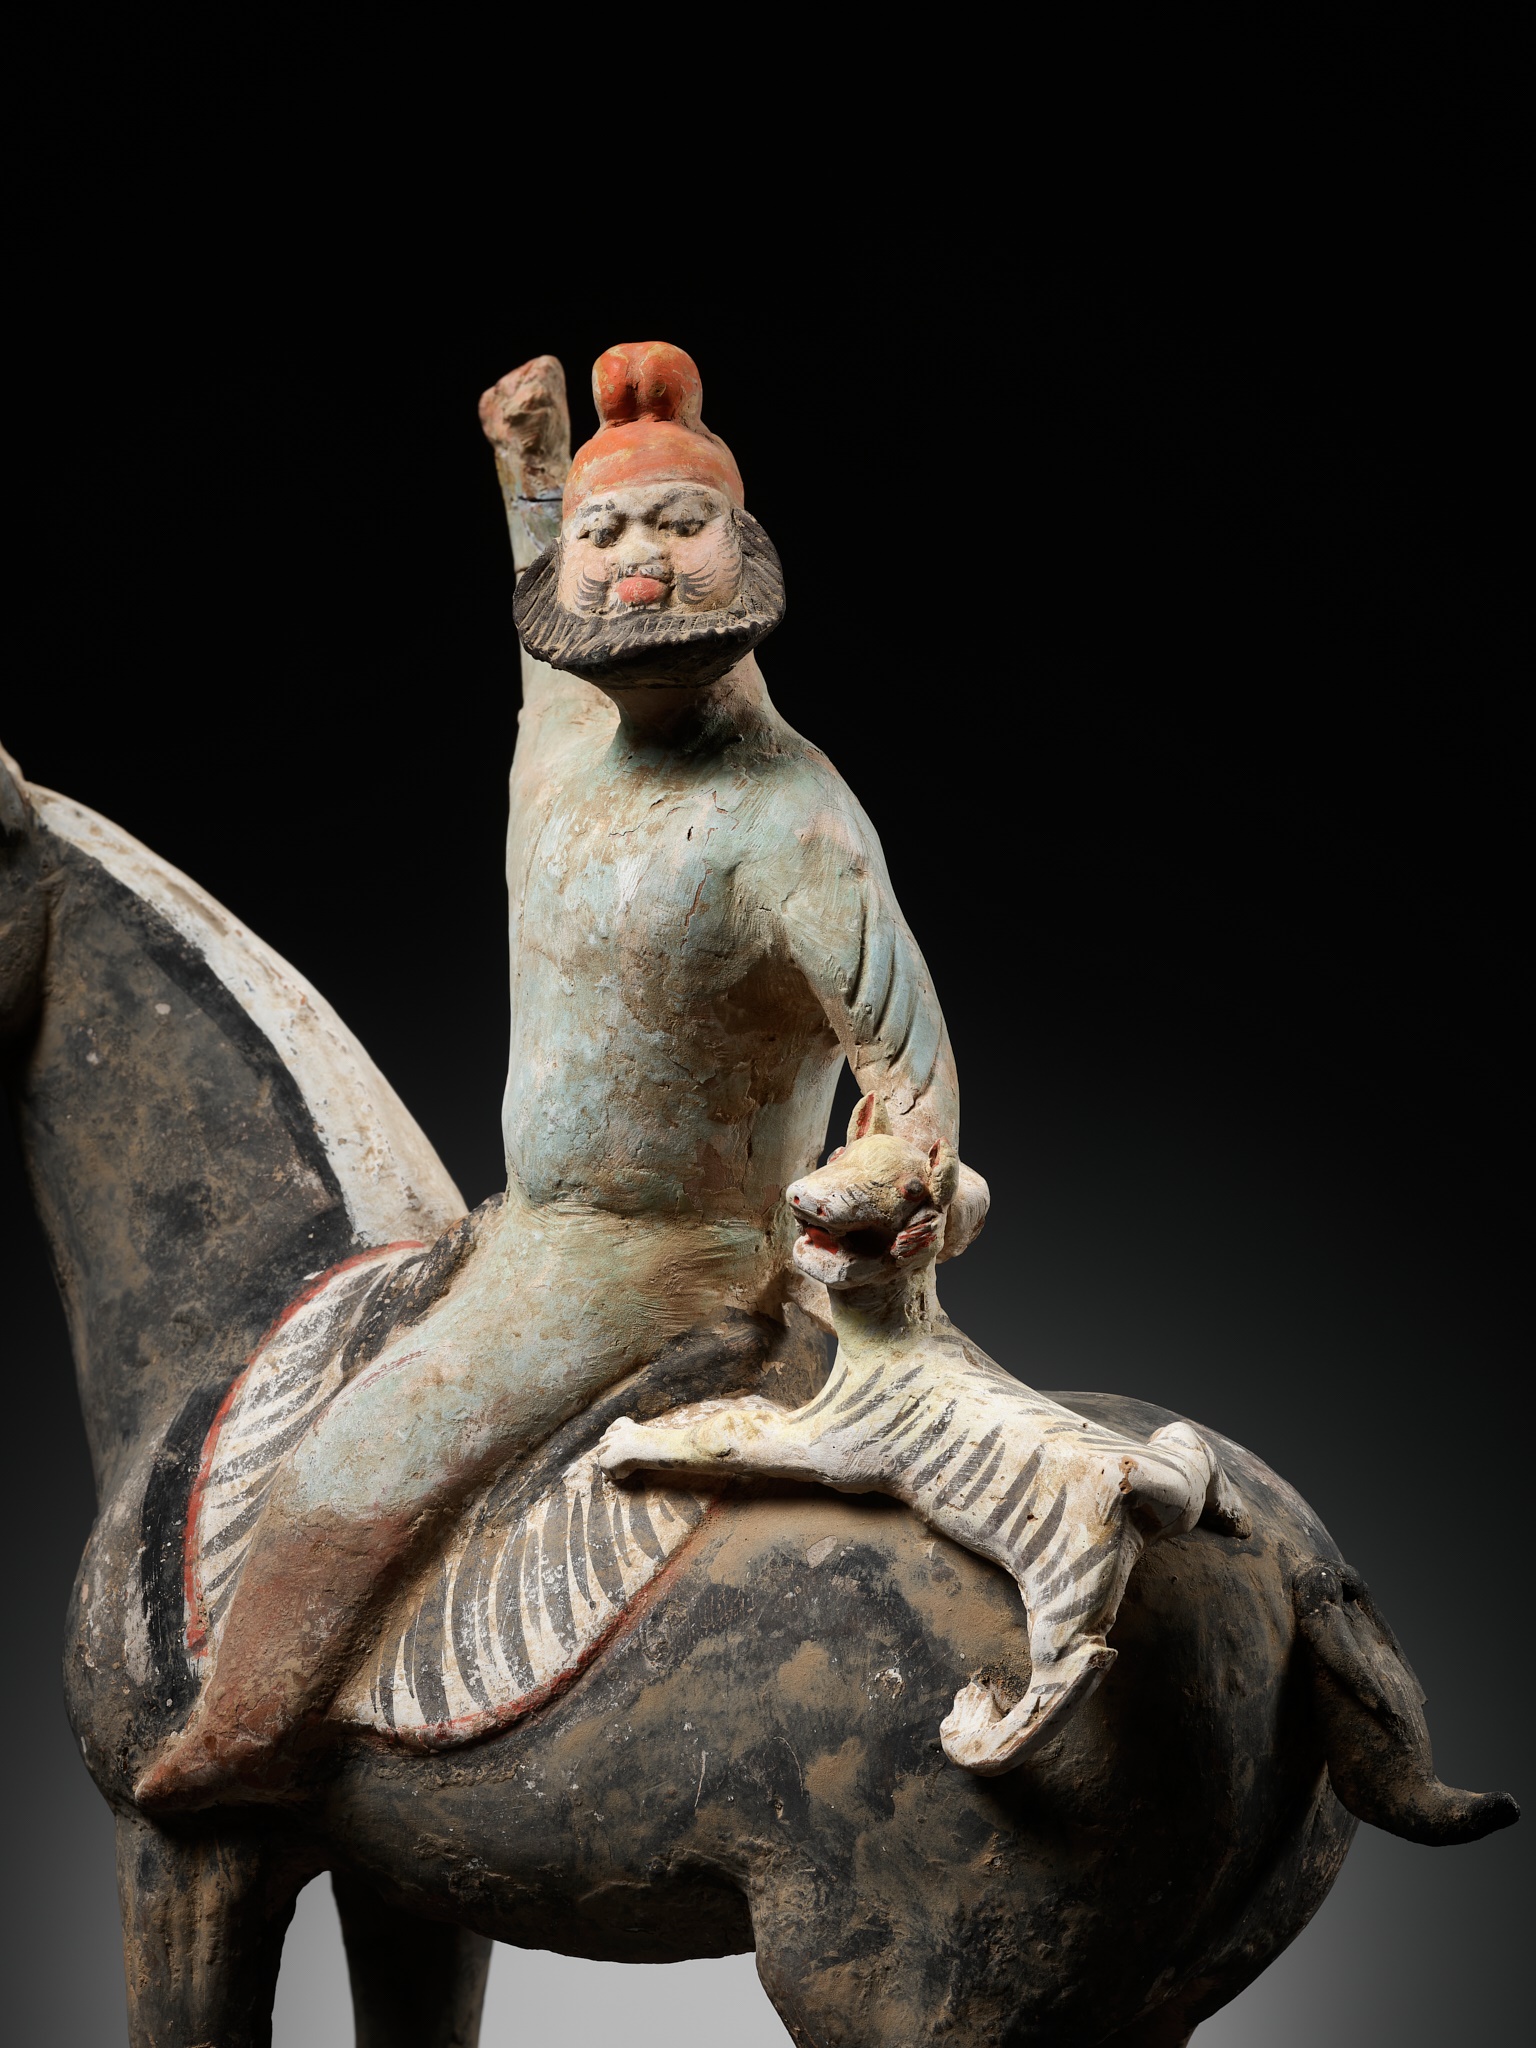 A RARE PAINTED POTTERY HORSE WITH A 'PHRYGIAN' RIDER AND TIGER CUB, TANG DYNASTY - Image 2 of 14